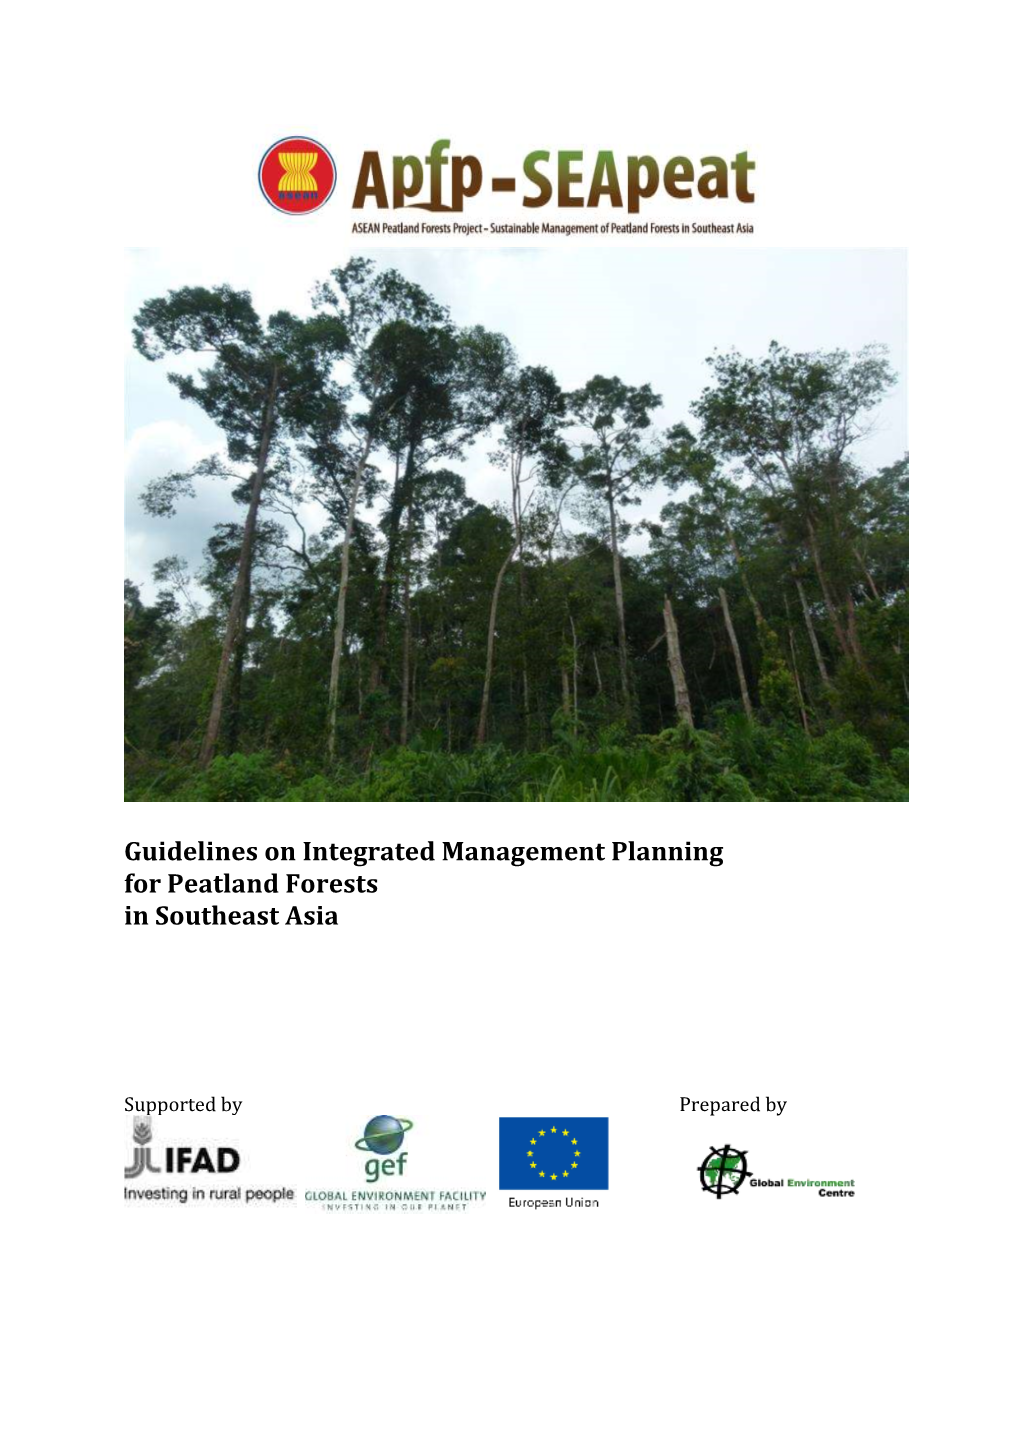 Guidelines for the Integrated Management Planning for Peatland Forests in Southeast Asia (SEA)